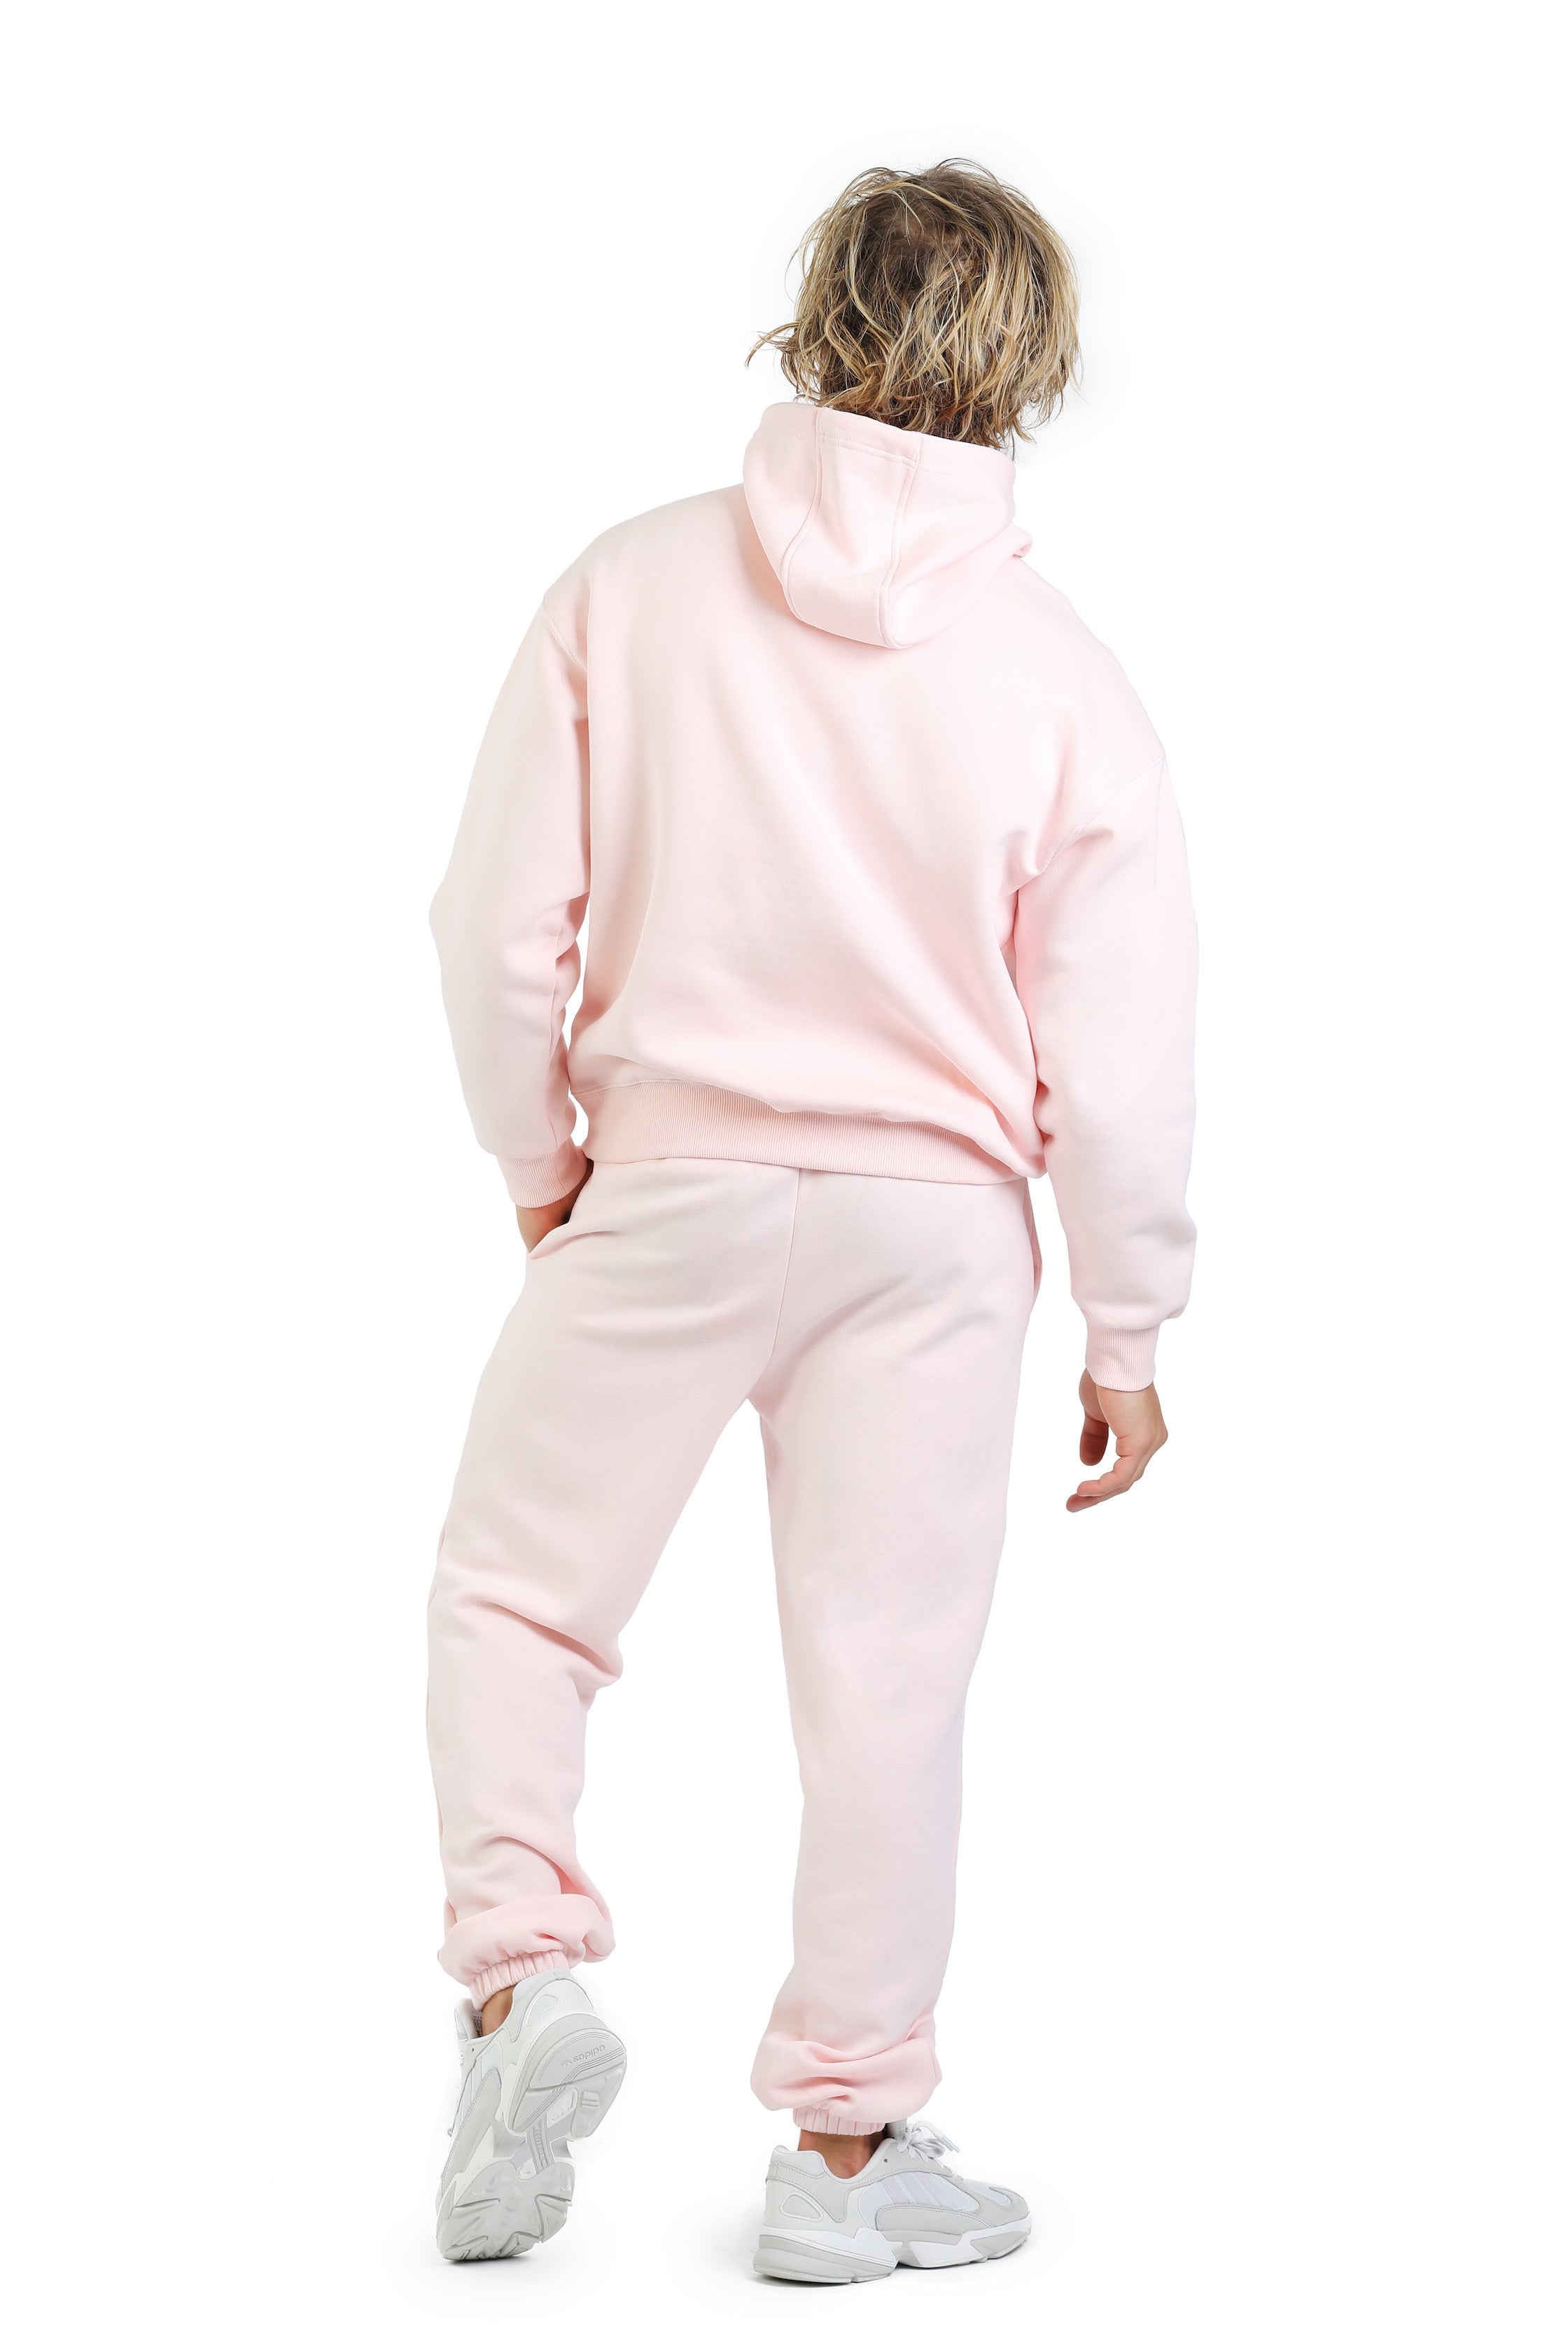 Men's sweatsuit set in petal pink from Lazypants - always a great buy at a reasonable price.